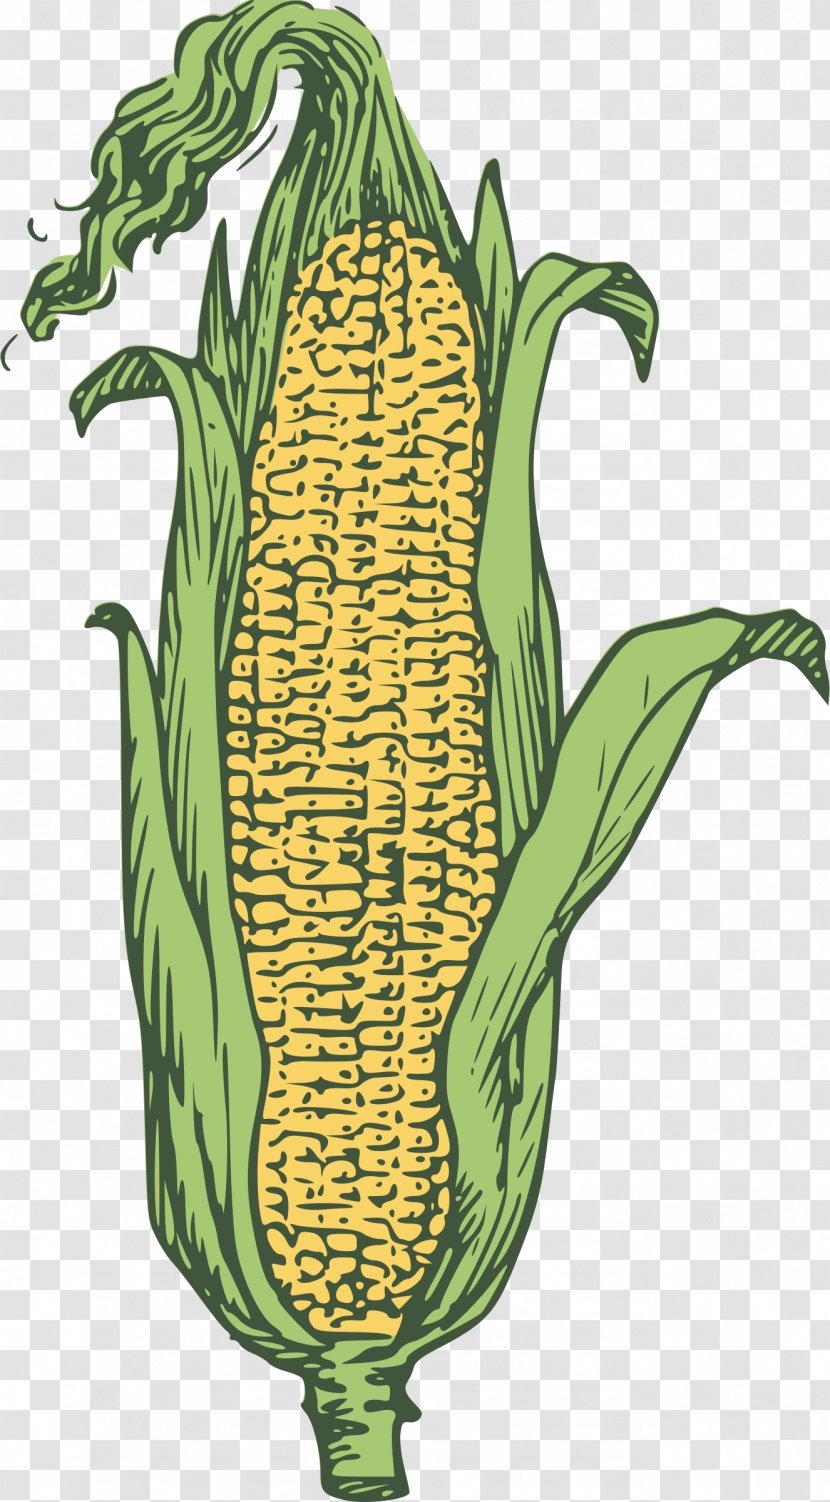 Candy Corn On The Cob Popcorn Maize Ear - Tree - Of Clipart Transparent PNG